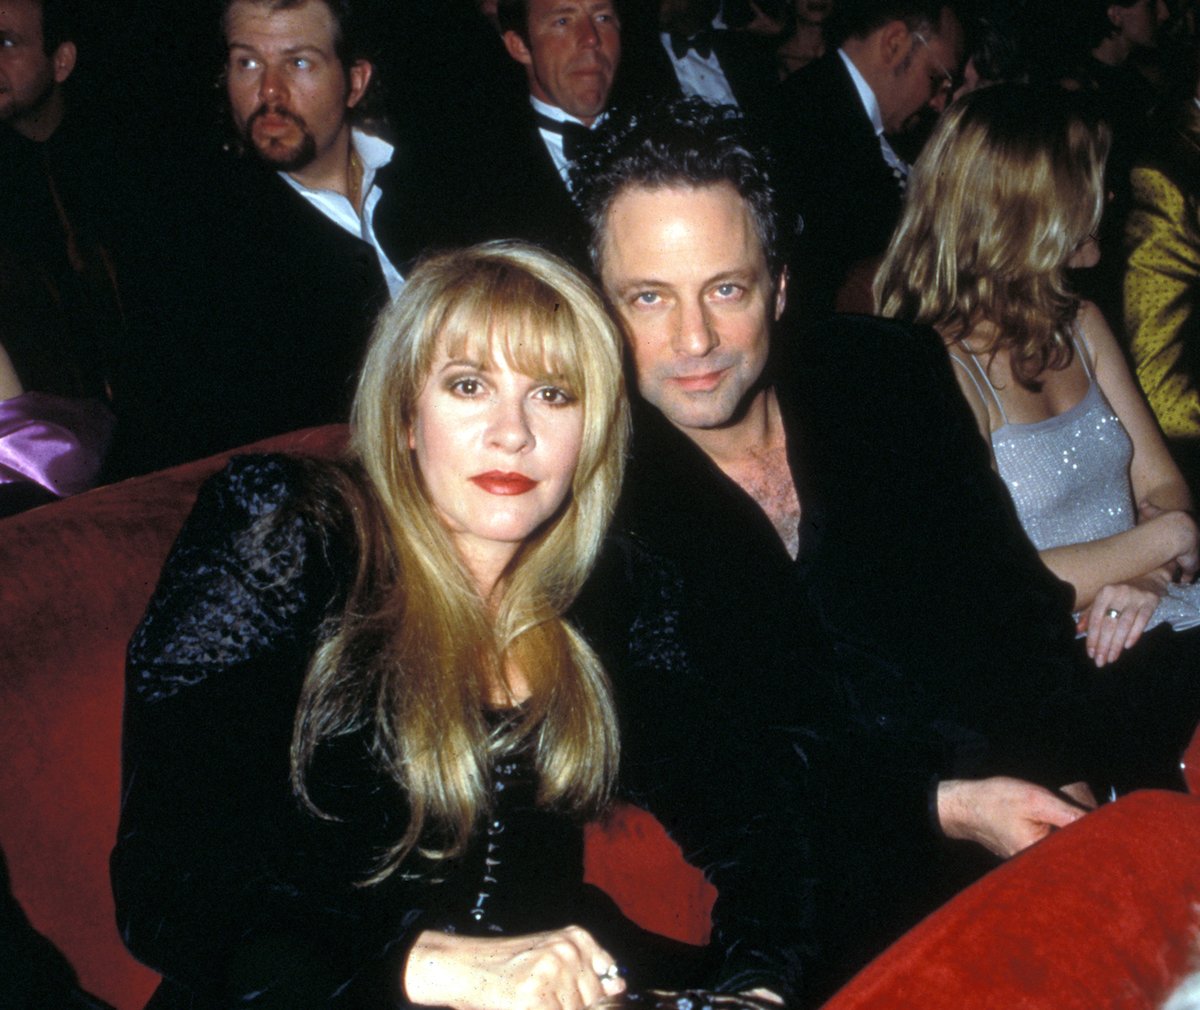 Stevie Nicks and Lindsey Buckingham sit and pose together at an event.